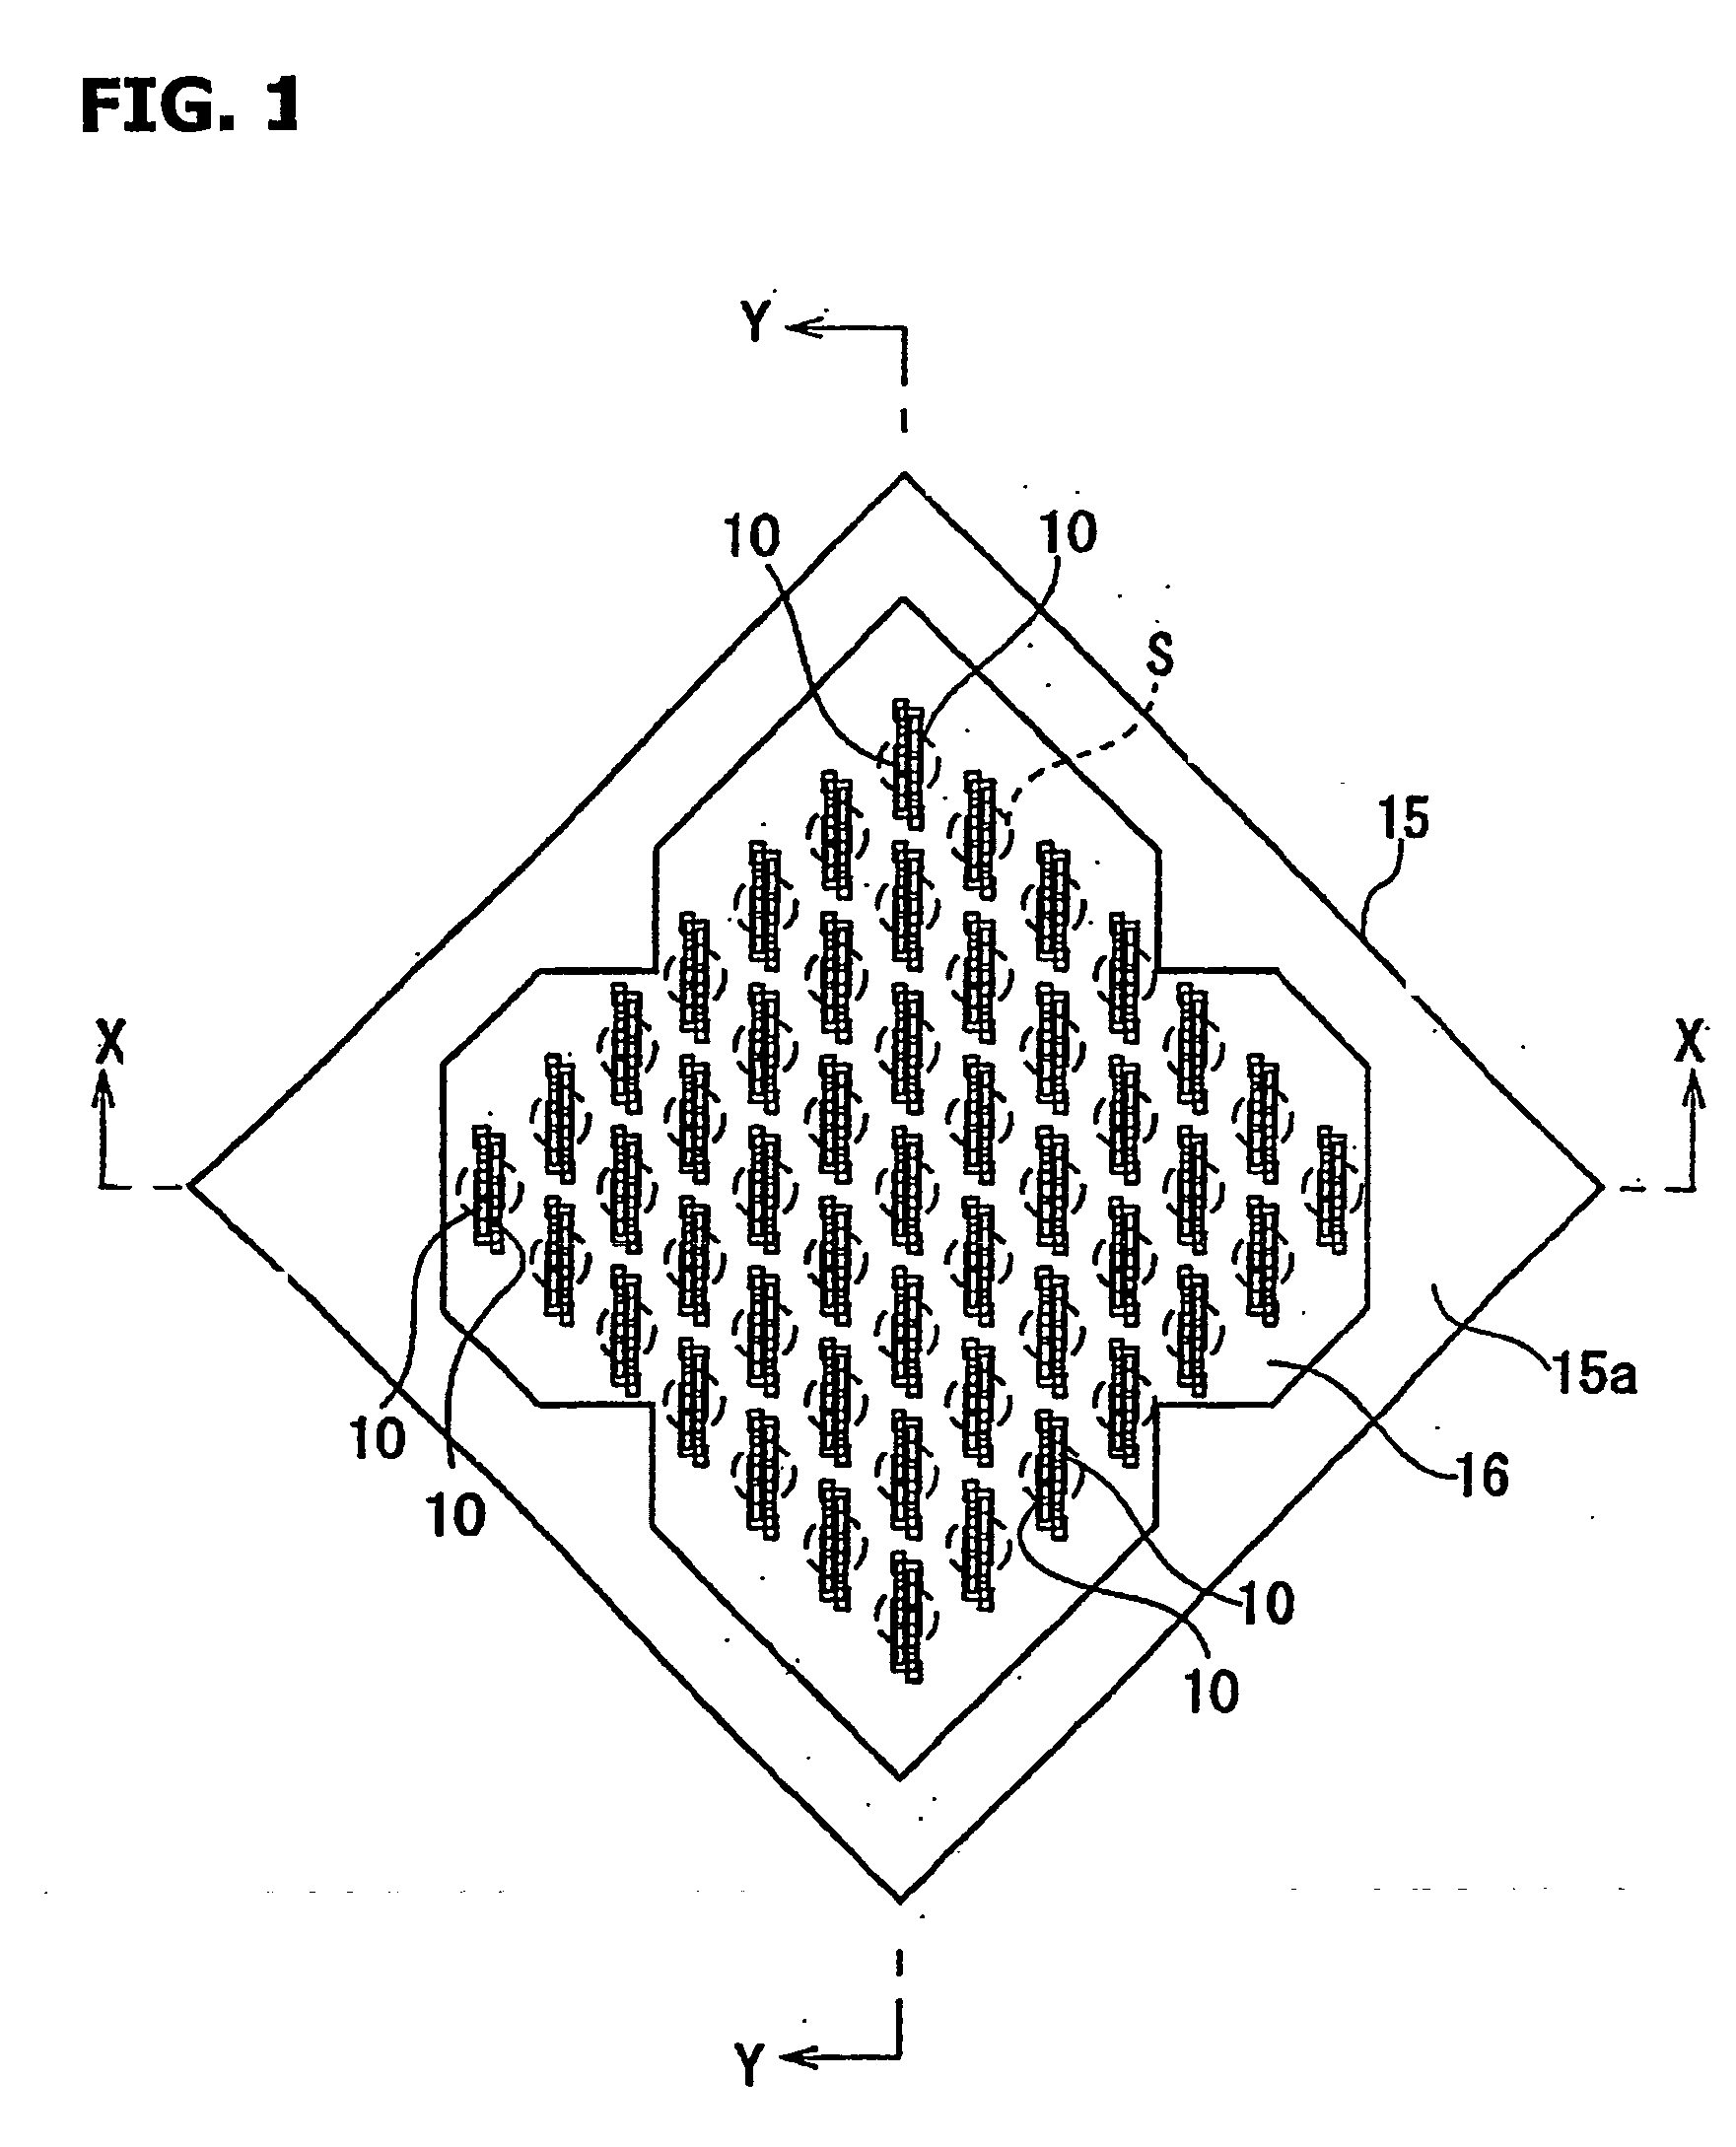 Socket and contact of semiconductor package